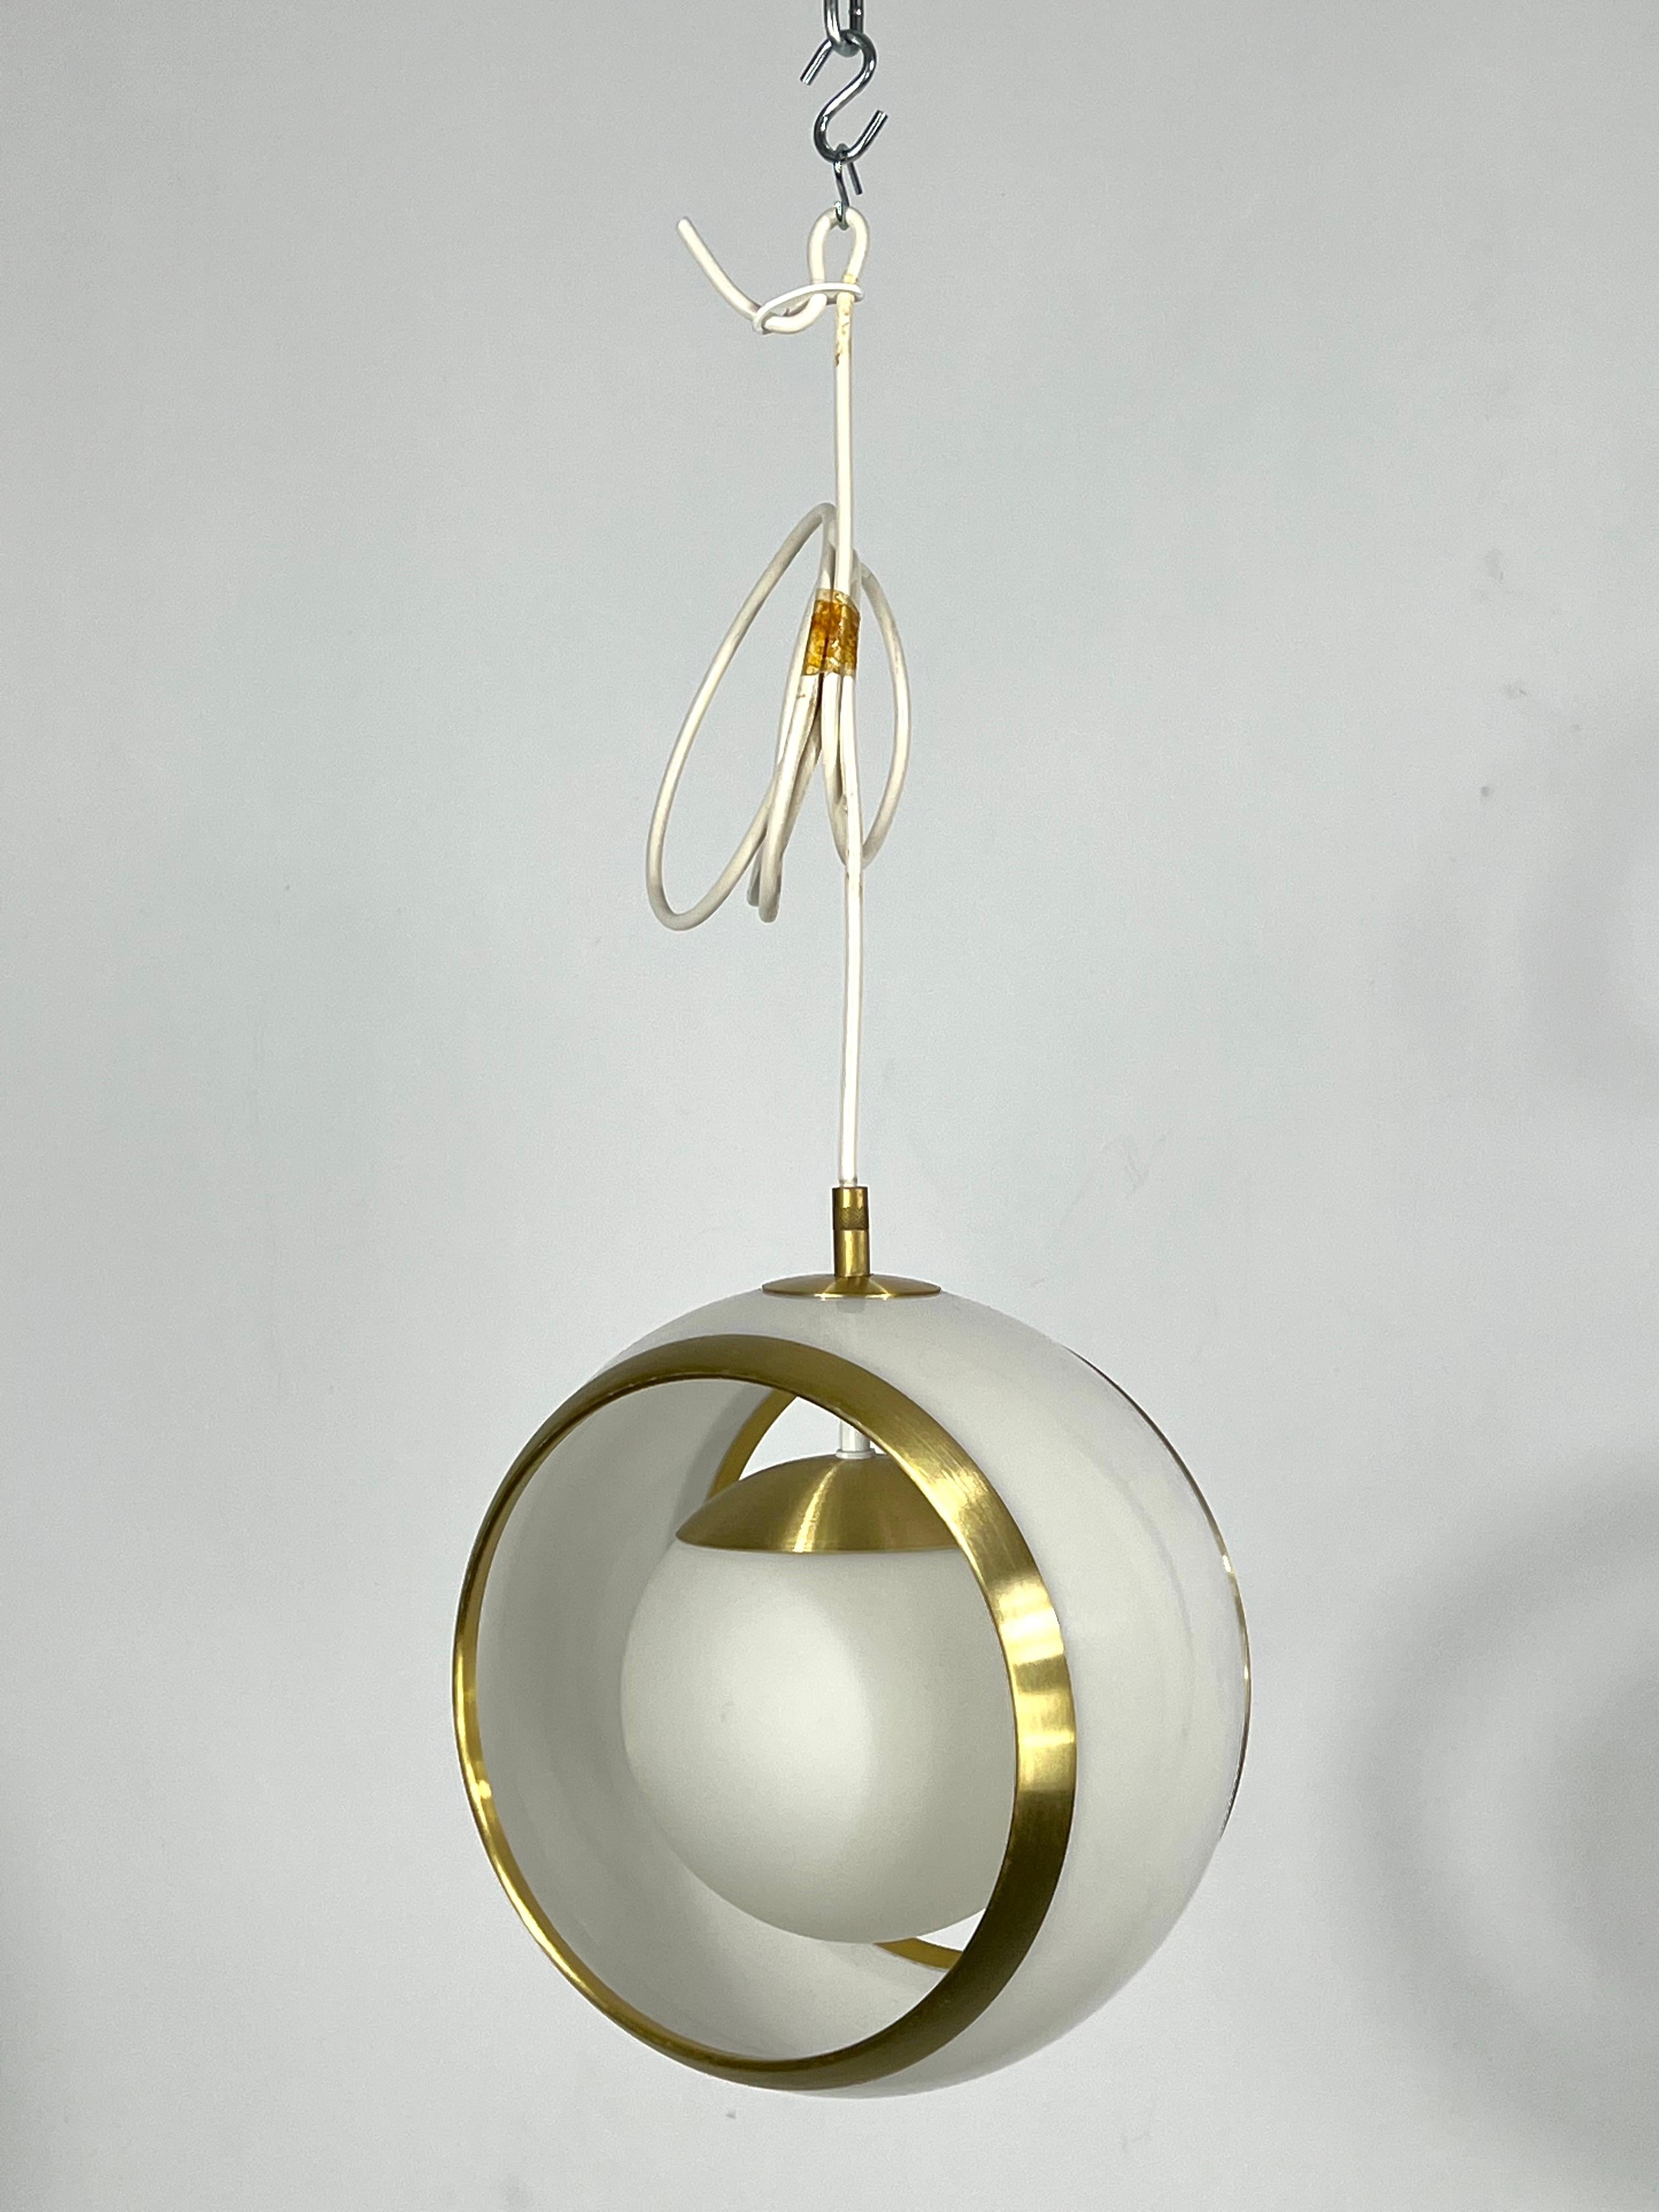 Excellent original condition with normal trace of age and use for this pendant produced in Italy during the 60s by Stilux Milano. Made of gilded aluminum, perspex and opaline glass. Full working with EU standard, adaptable on demand for USA standard.